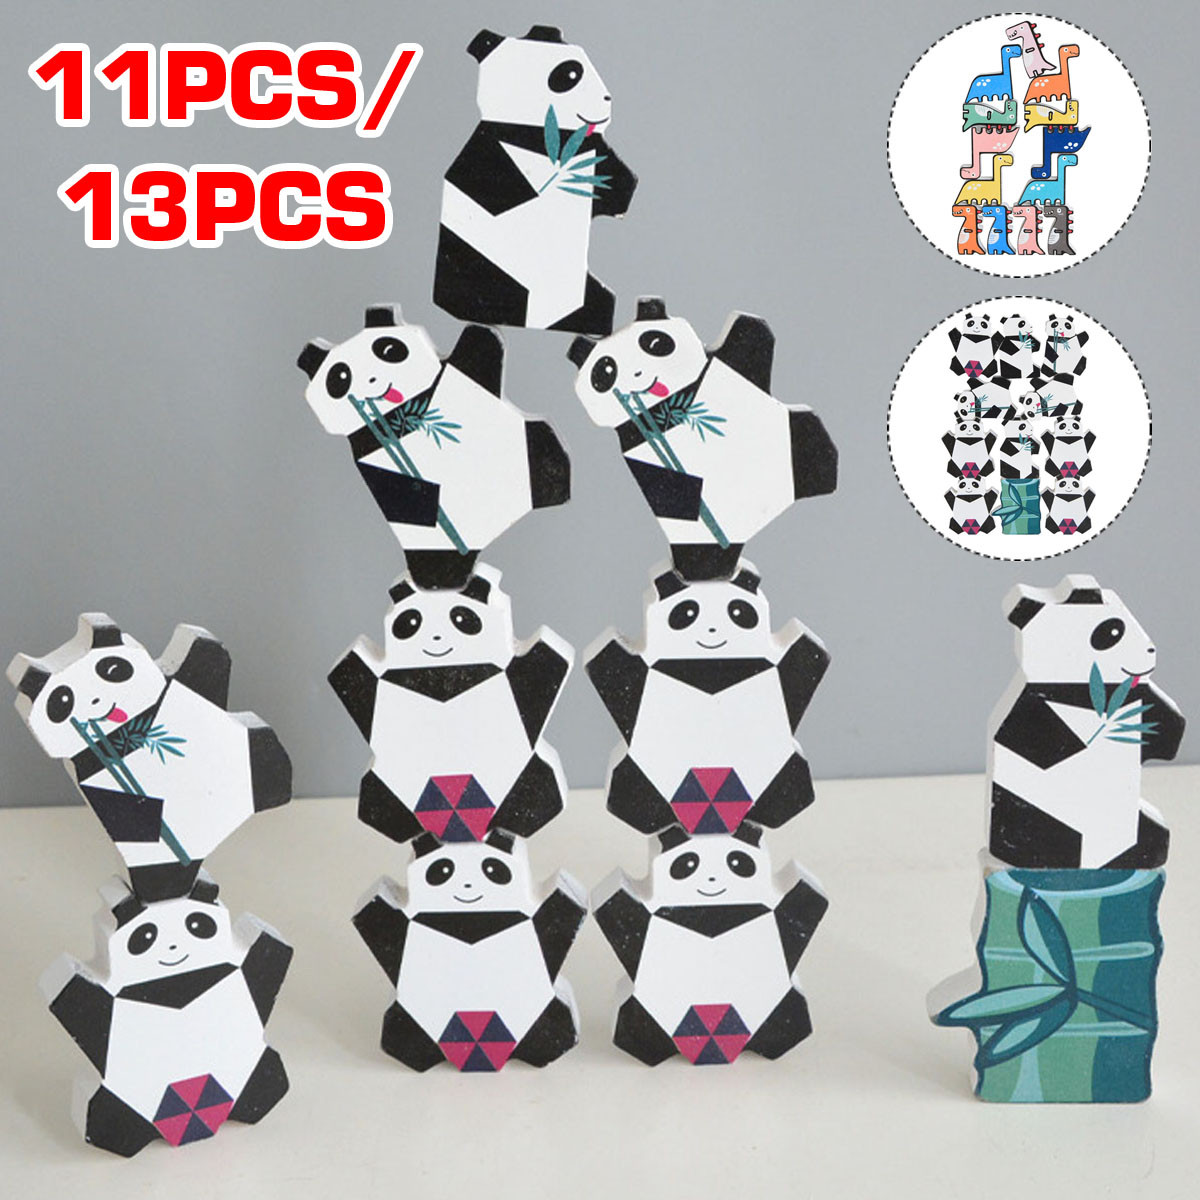 1113-Pcs-Creative-Panda-Dinosaur-Wooden-Stacking-Game-Building-Blocks-Early-Educational-Toy-for-Kids-1717485-1